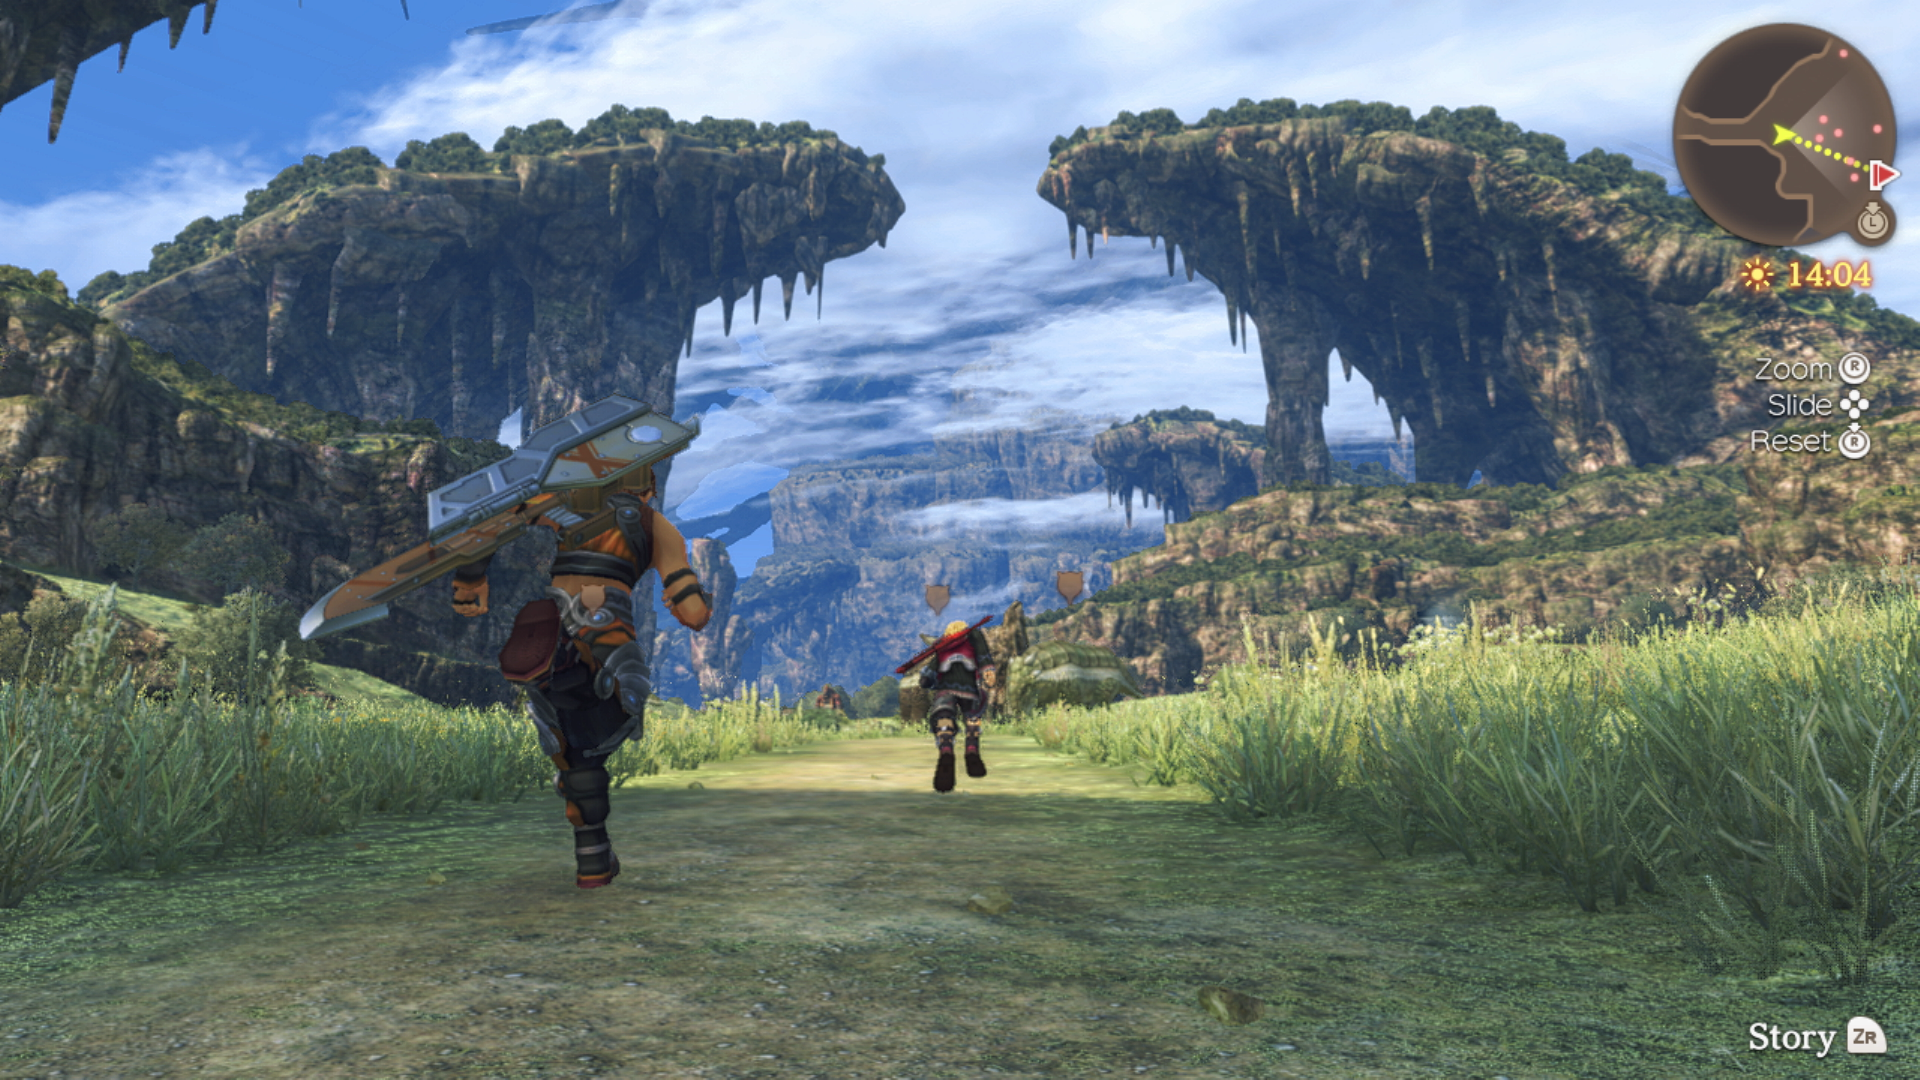  Review: 10 Years on and Xenoblade Chronicles Definitive Edition is still fantastic 